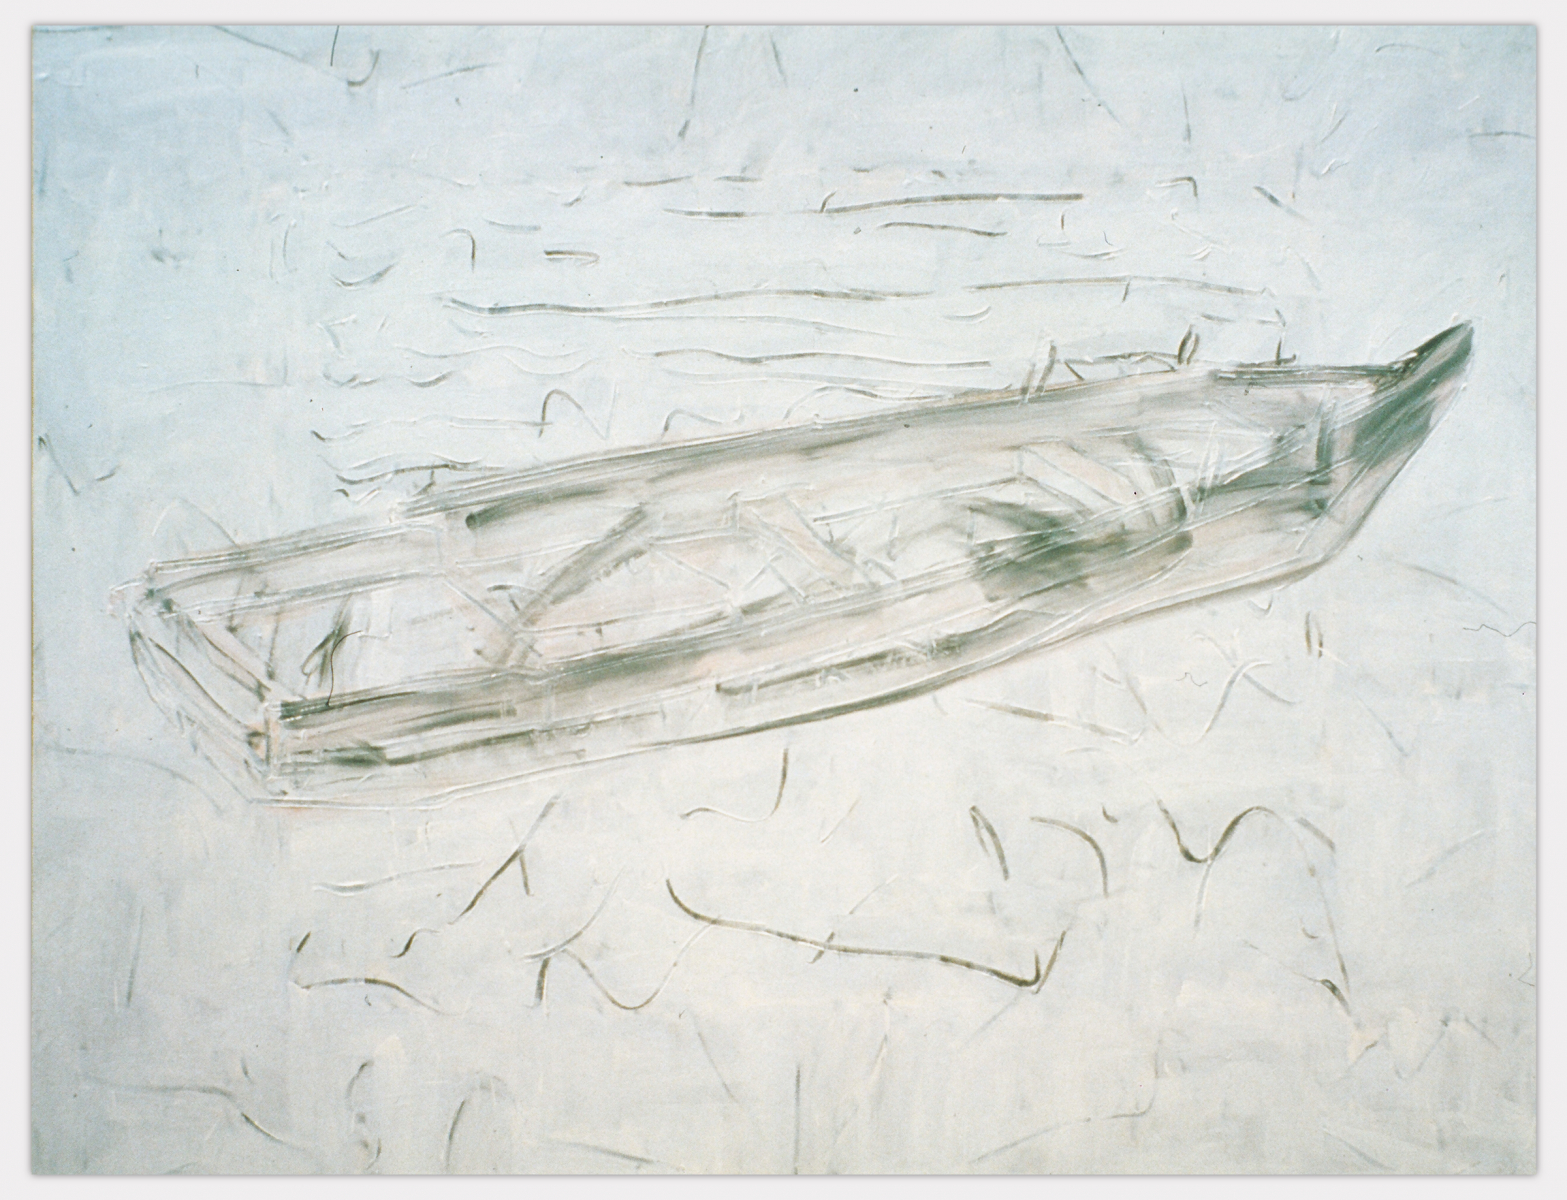 Untitled-88012, 1988, Oil on Canvas, 181.8x227.3cm